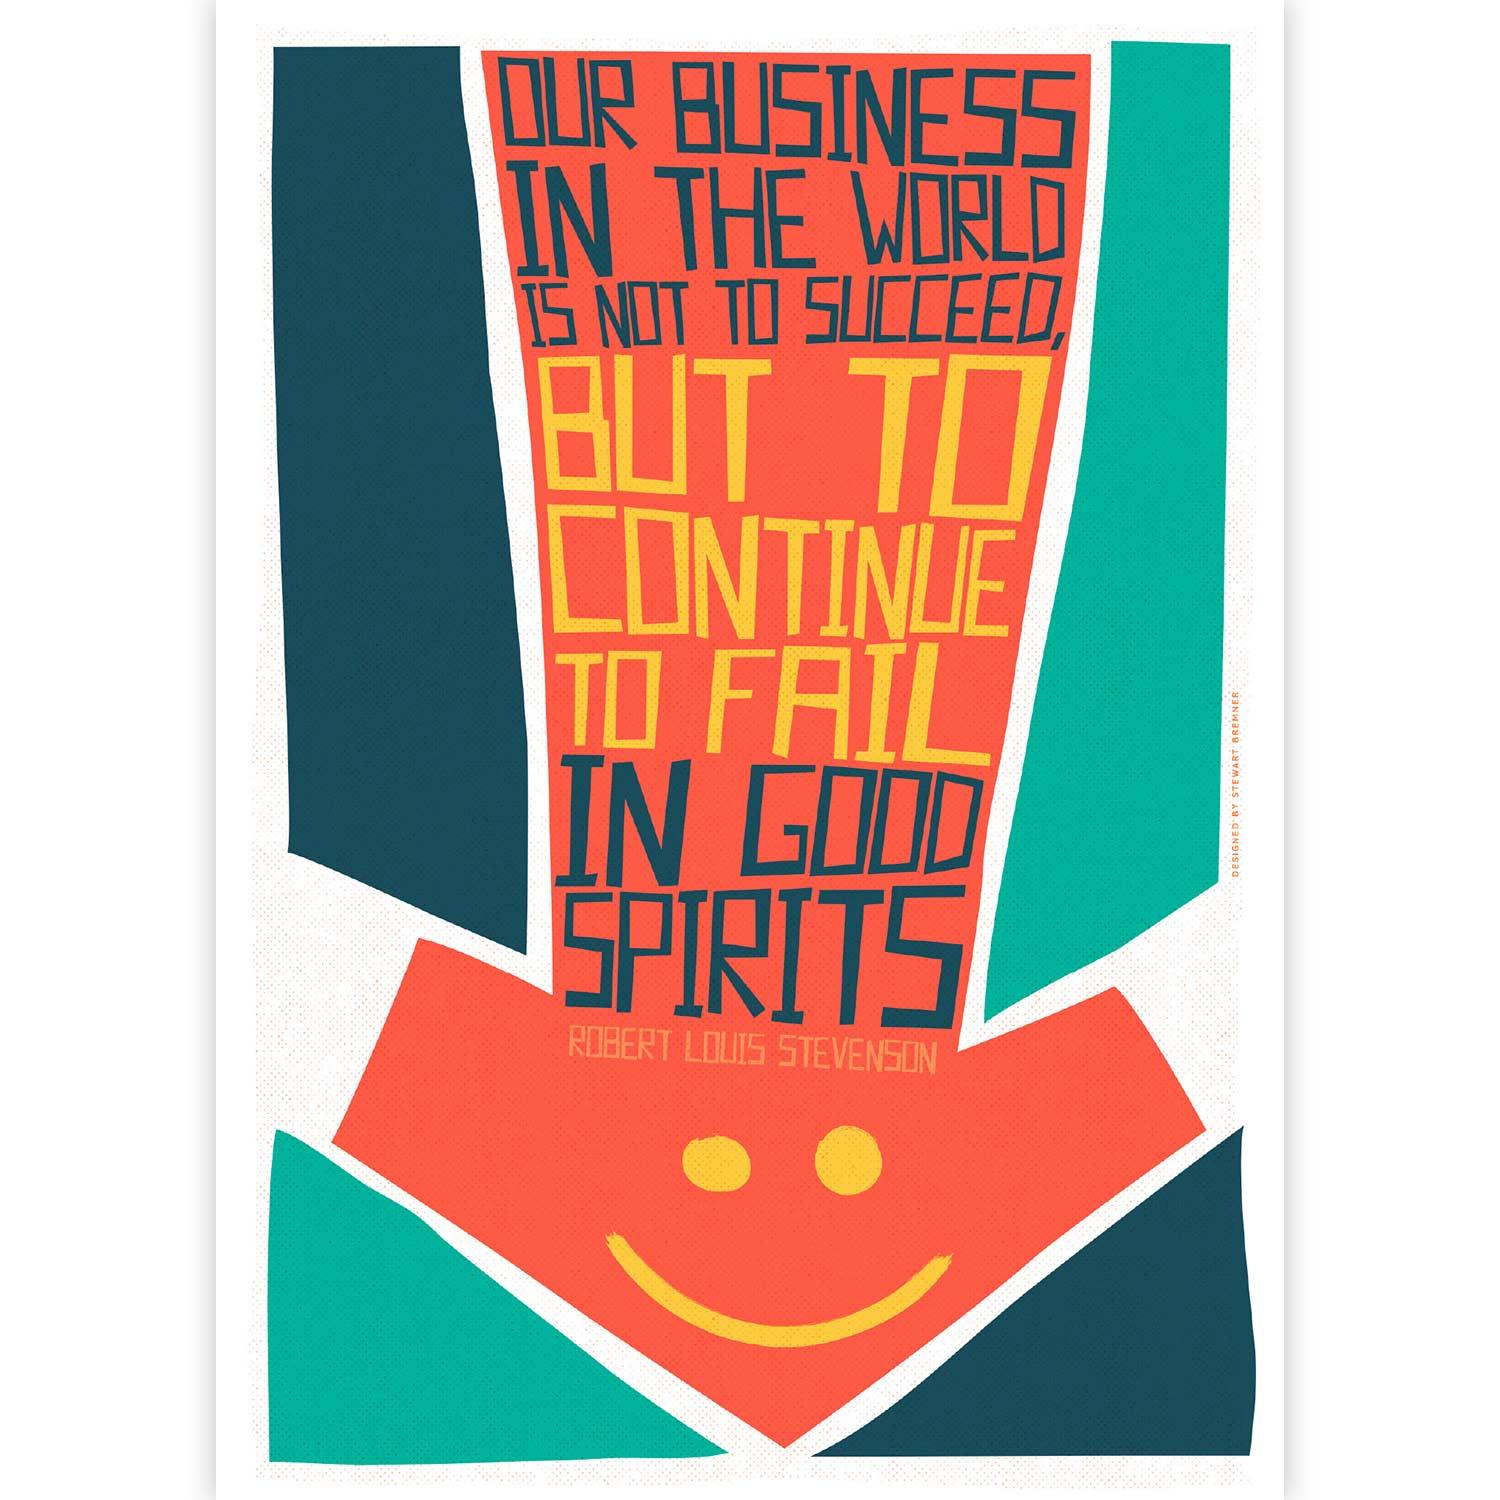 Our business in the world is not to succeed by Stewart Bremner